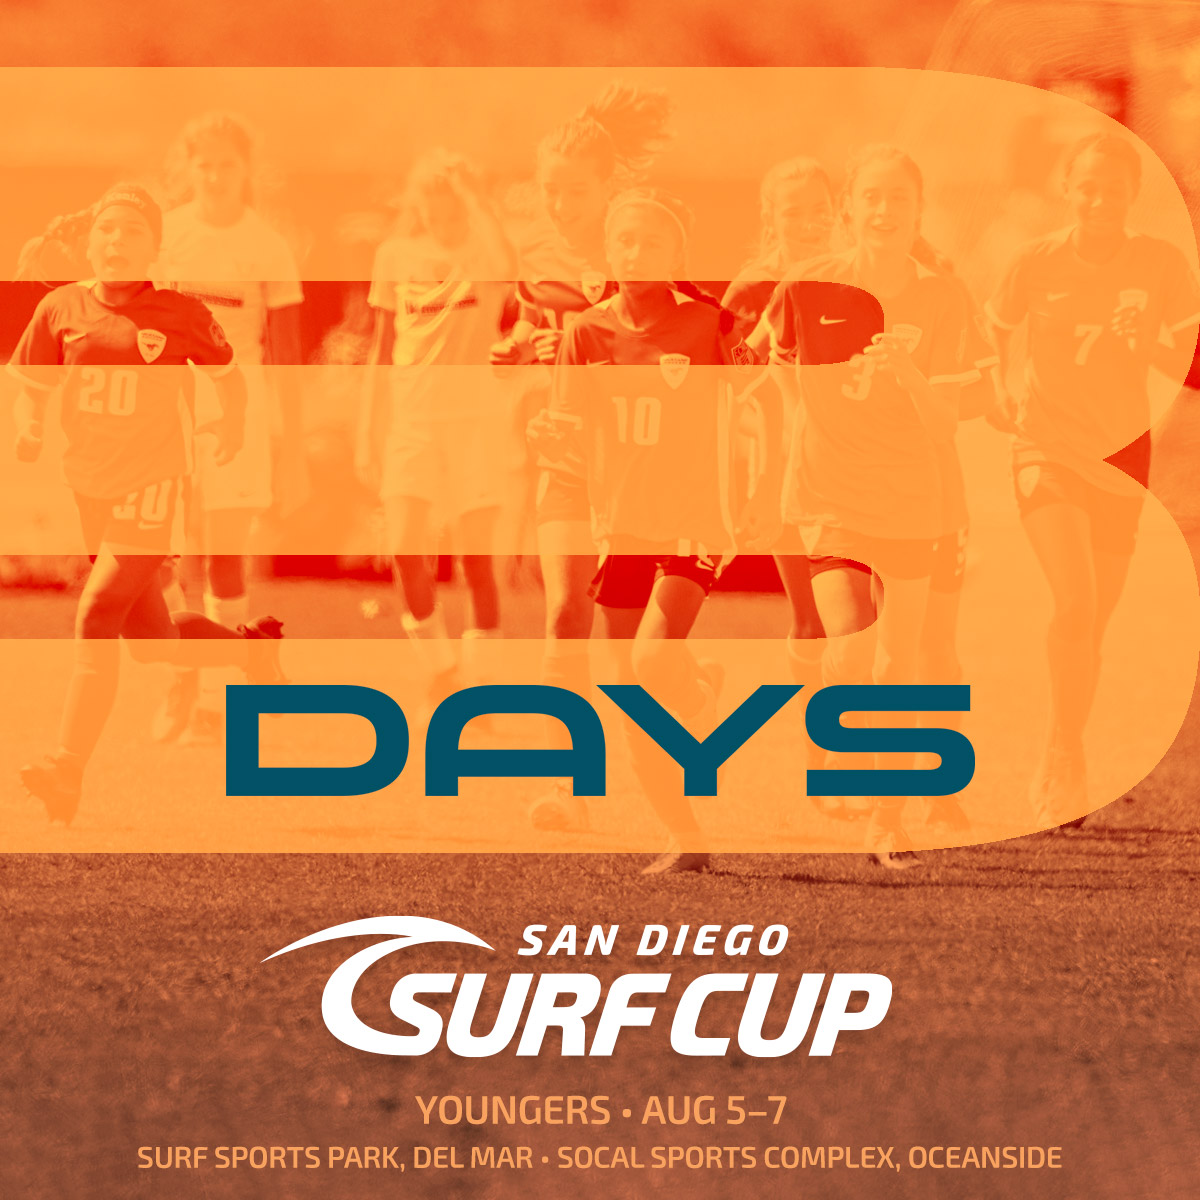 Let the countdown to #SurfCup YOUNGERS begin! 3 DAYS UNTIL the #BestOfTheBest convene in San Diego & 600+ teams compete over the next THREE DAYS showcasing the top competition from across the Nation! We can't wait to see all our teams take the pitch on Saturday!